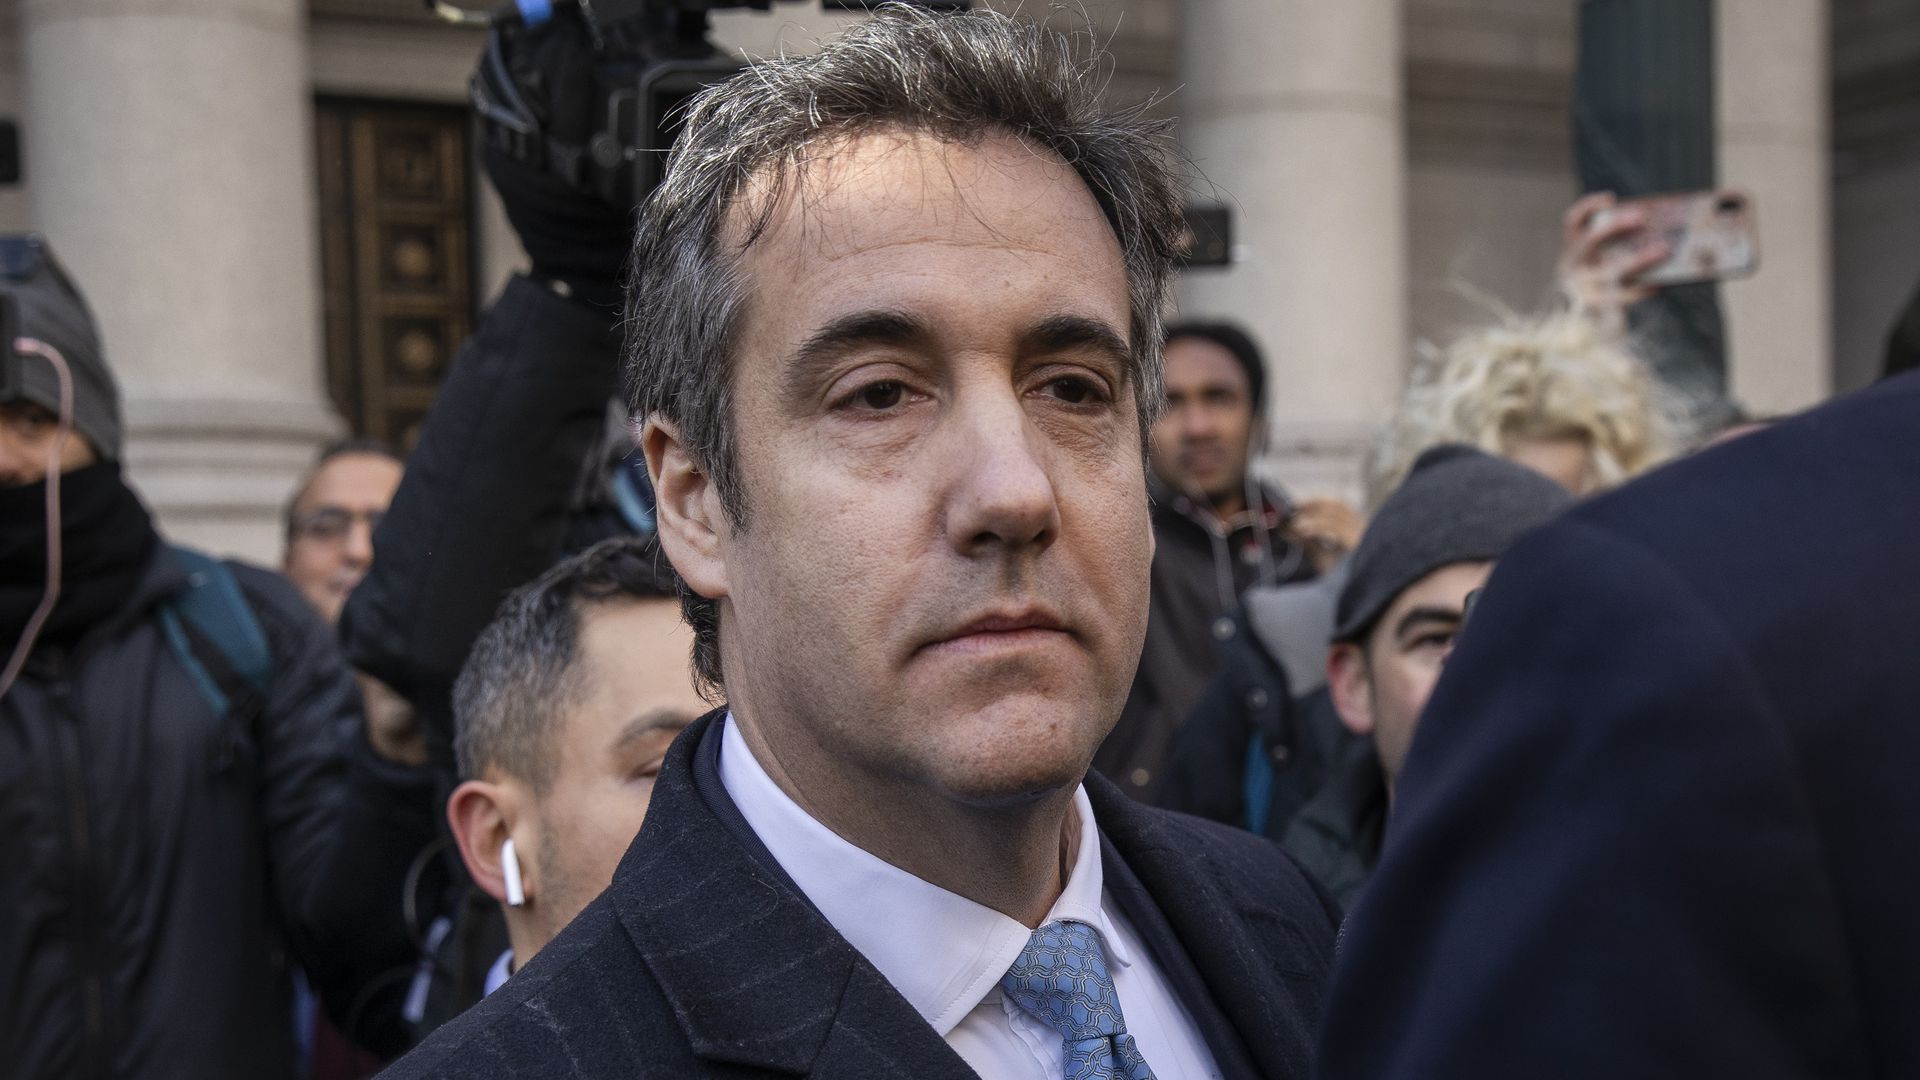 Michael Cohen sentenced to three years in prison